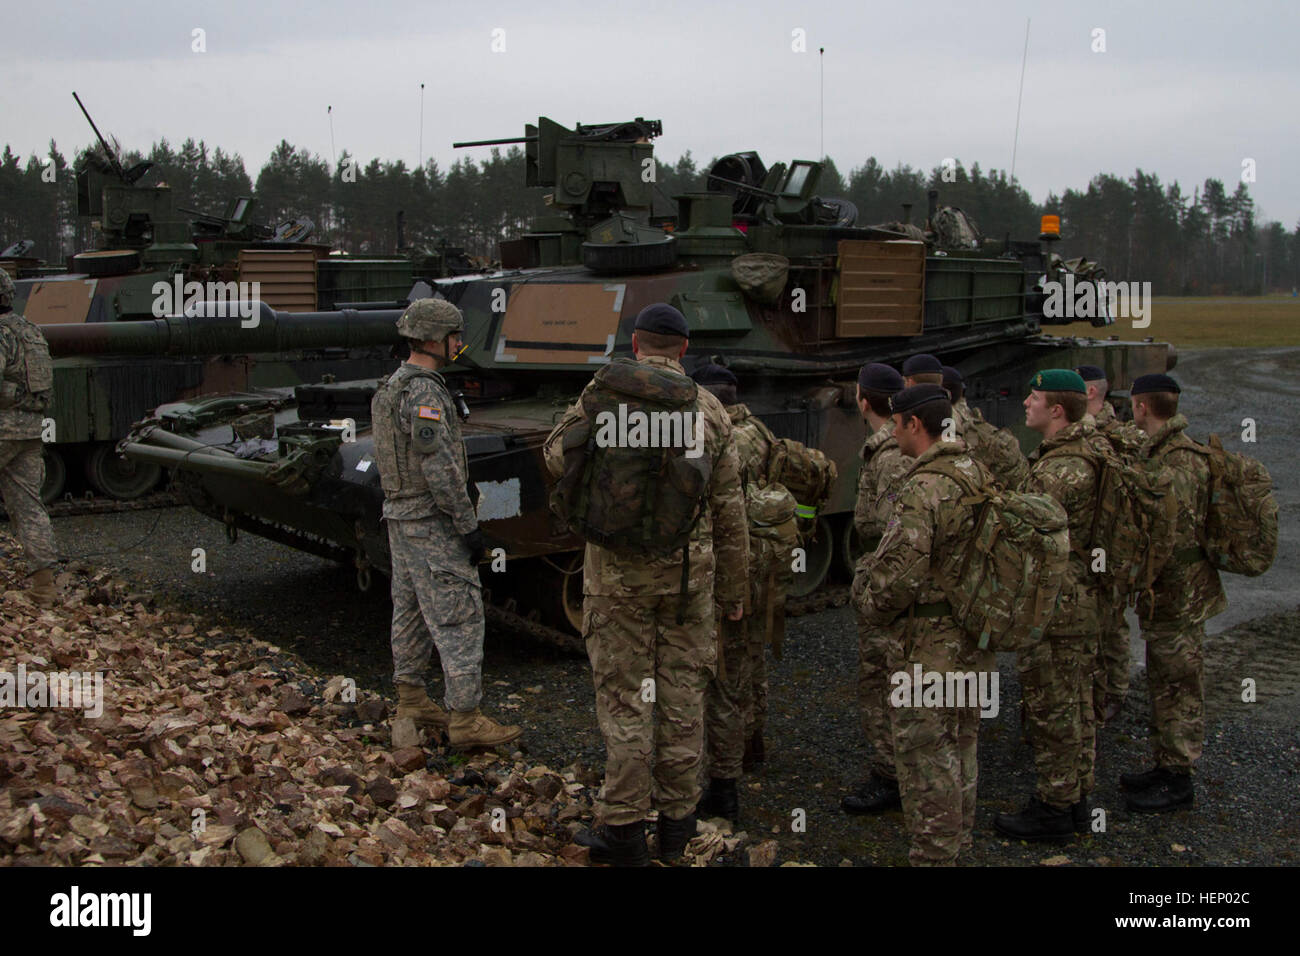 Soldiers from the United Kingdom listen to a 2nd Battalion, 12th Cavalry Regiment, 1st Brigade Combat Team, 1st Cavalry Division Soldier as he explains the maintenance procedures for an M1A2 Abrams tank in Graffenwoehr, Germany, Nov. 18. (U.S. Army photo by Sgt. Alexander Skripnichuk, 7th Mobile Public Affairs Detachment) Showing our ways to allies 141118-A-DU810-003 Stock Photo